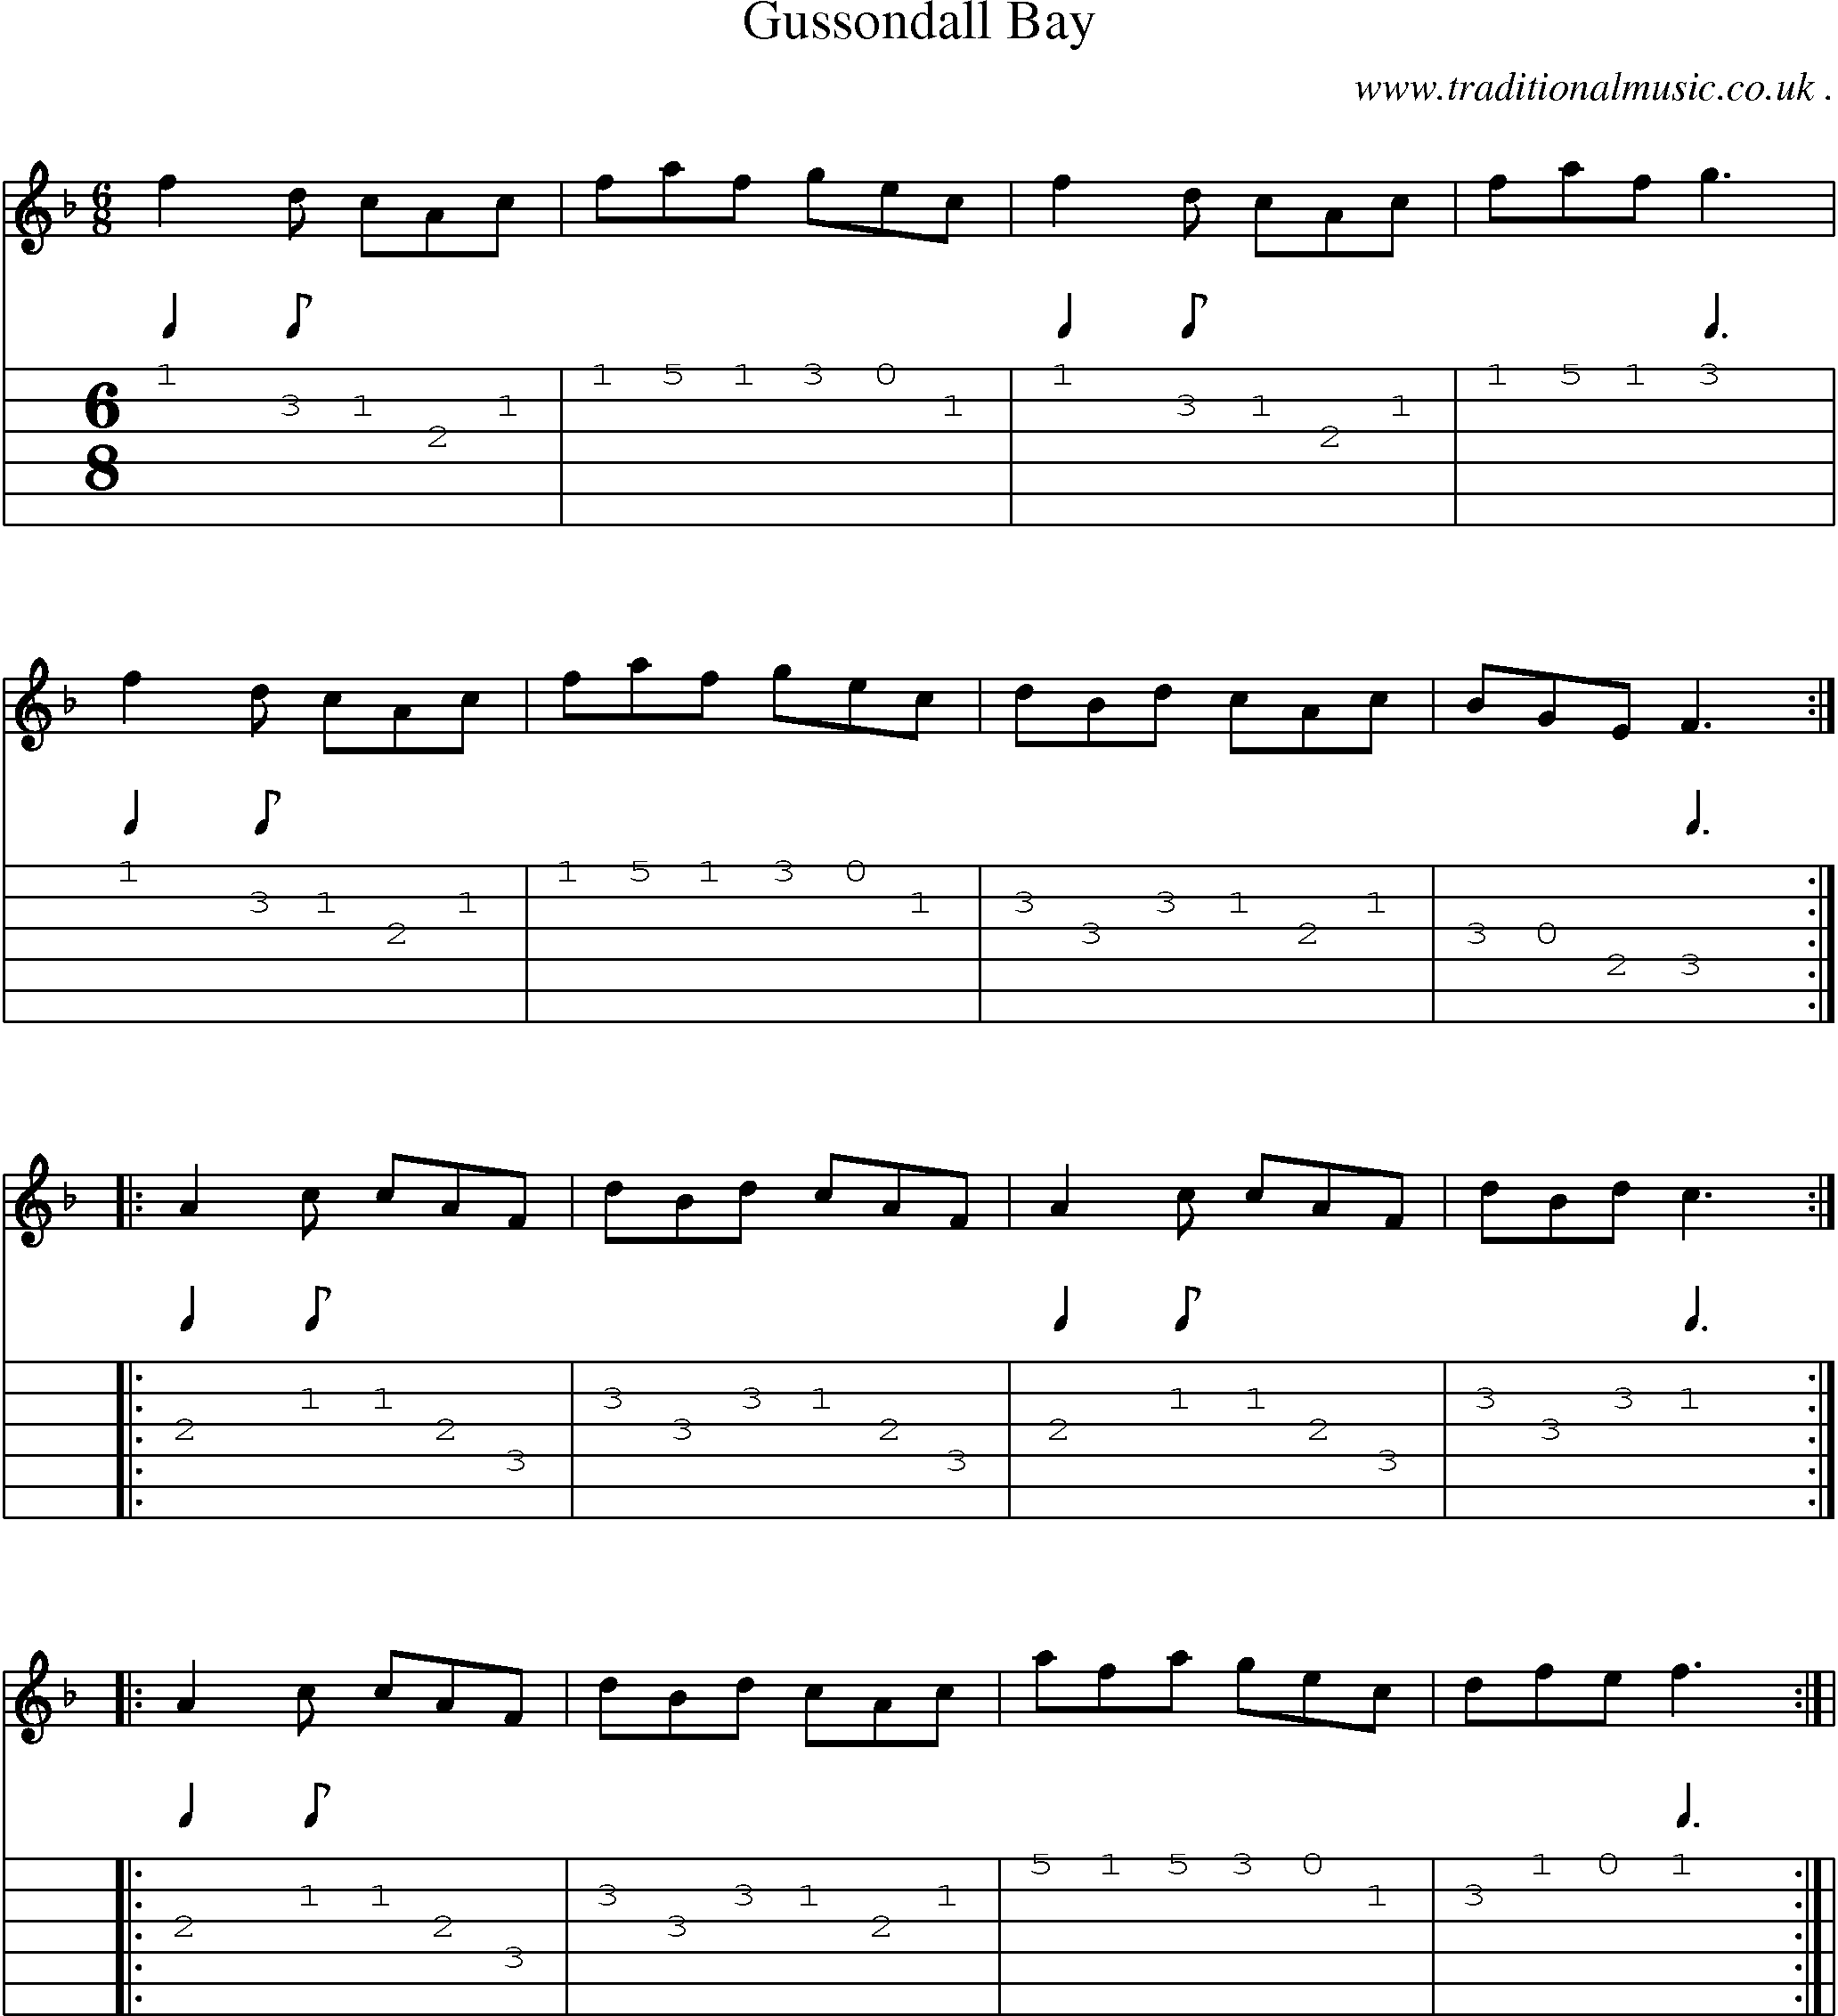 Sheet-Music and Guitar Tabs for Gussondall Bay